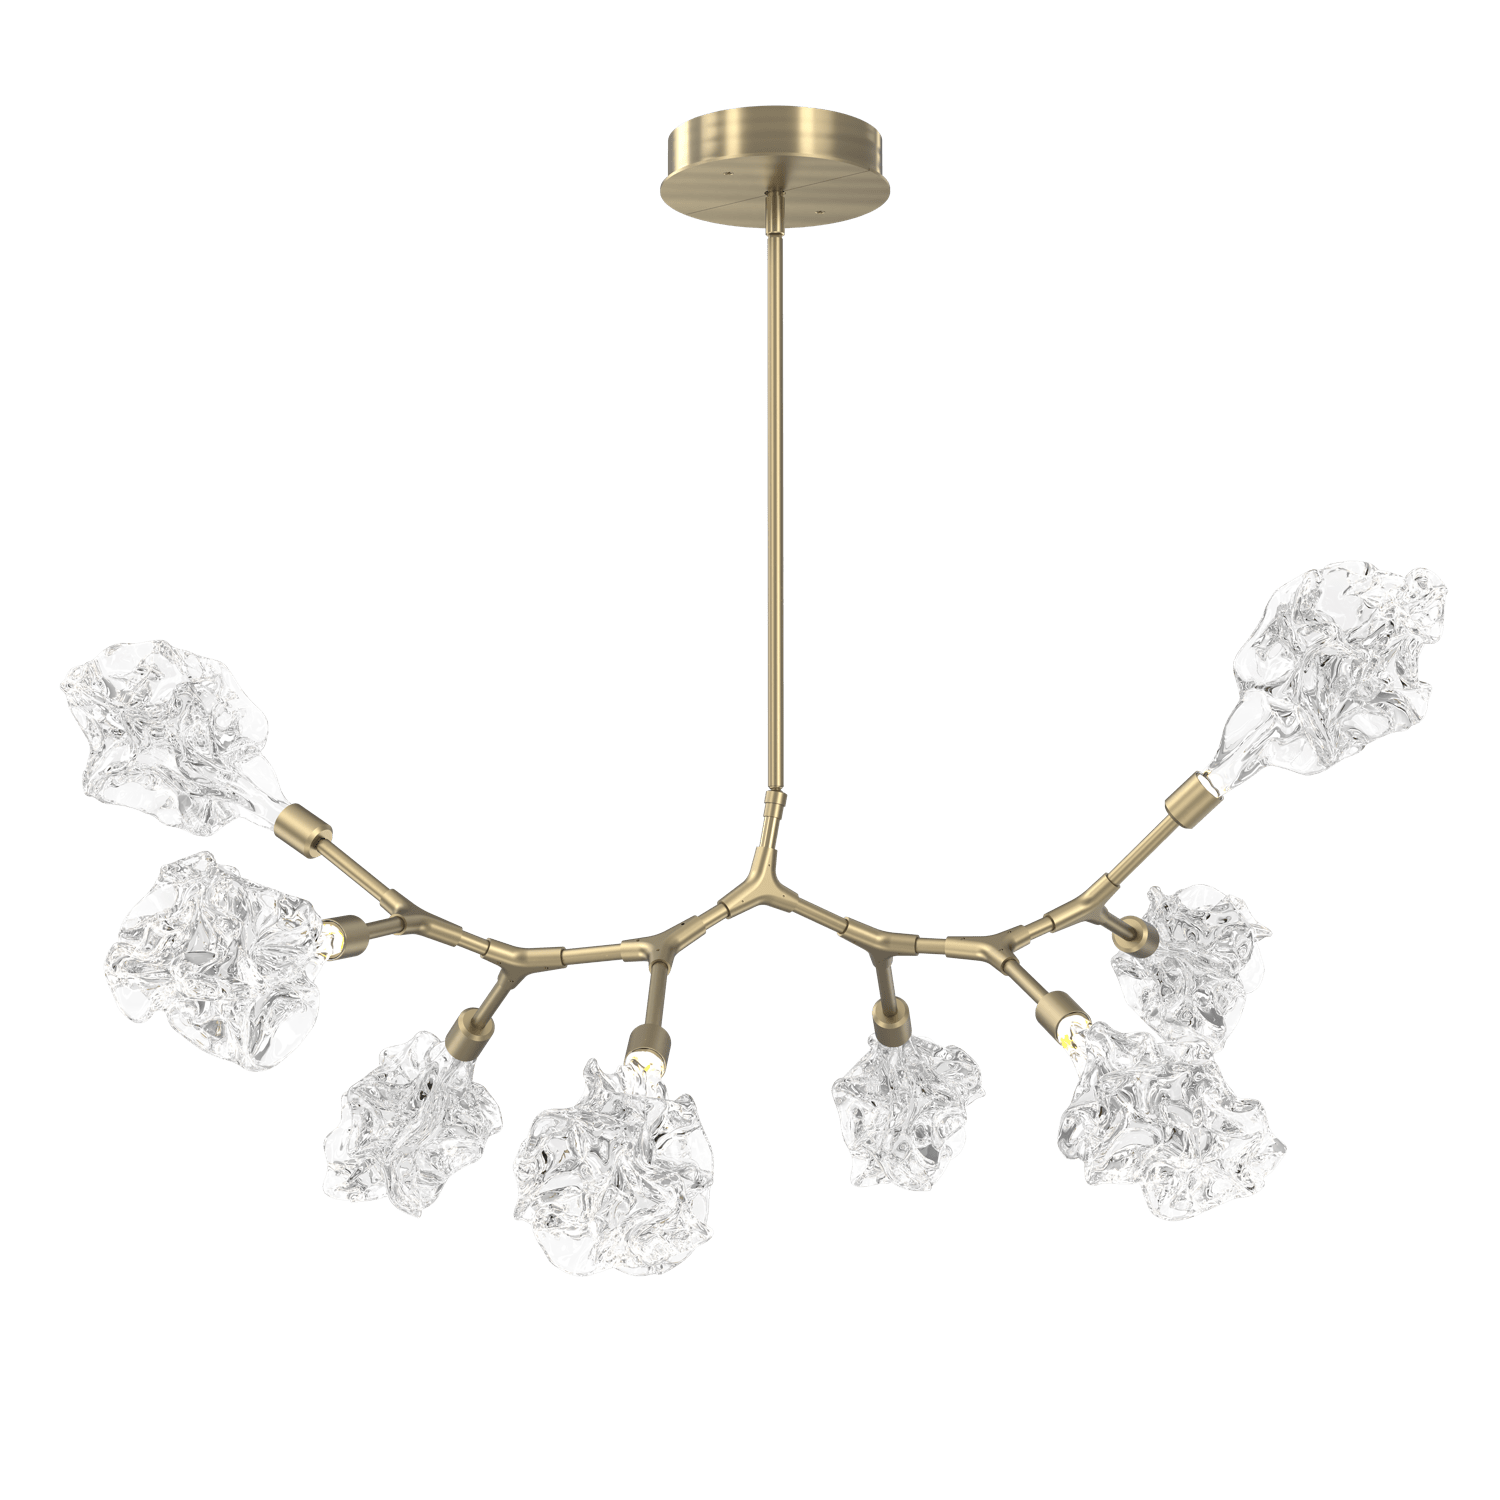 PLB0059-BB-HB-Hammerton-Studio-Blossom-8-light-organic-branch-chandelier-with-heritage-brass-finish-and-clear-handblown-crystal-glass-shades-and-LED-lamping